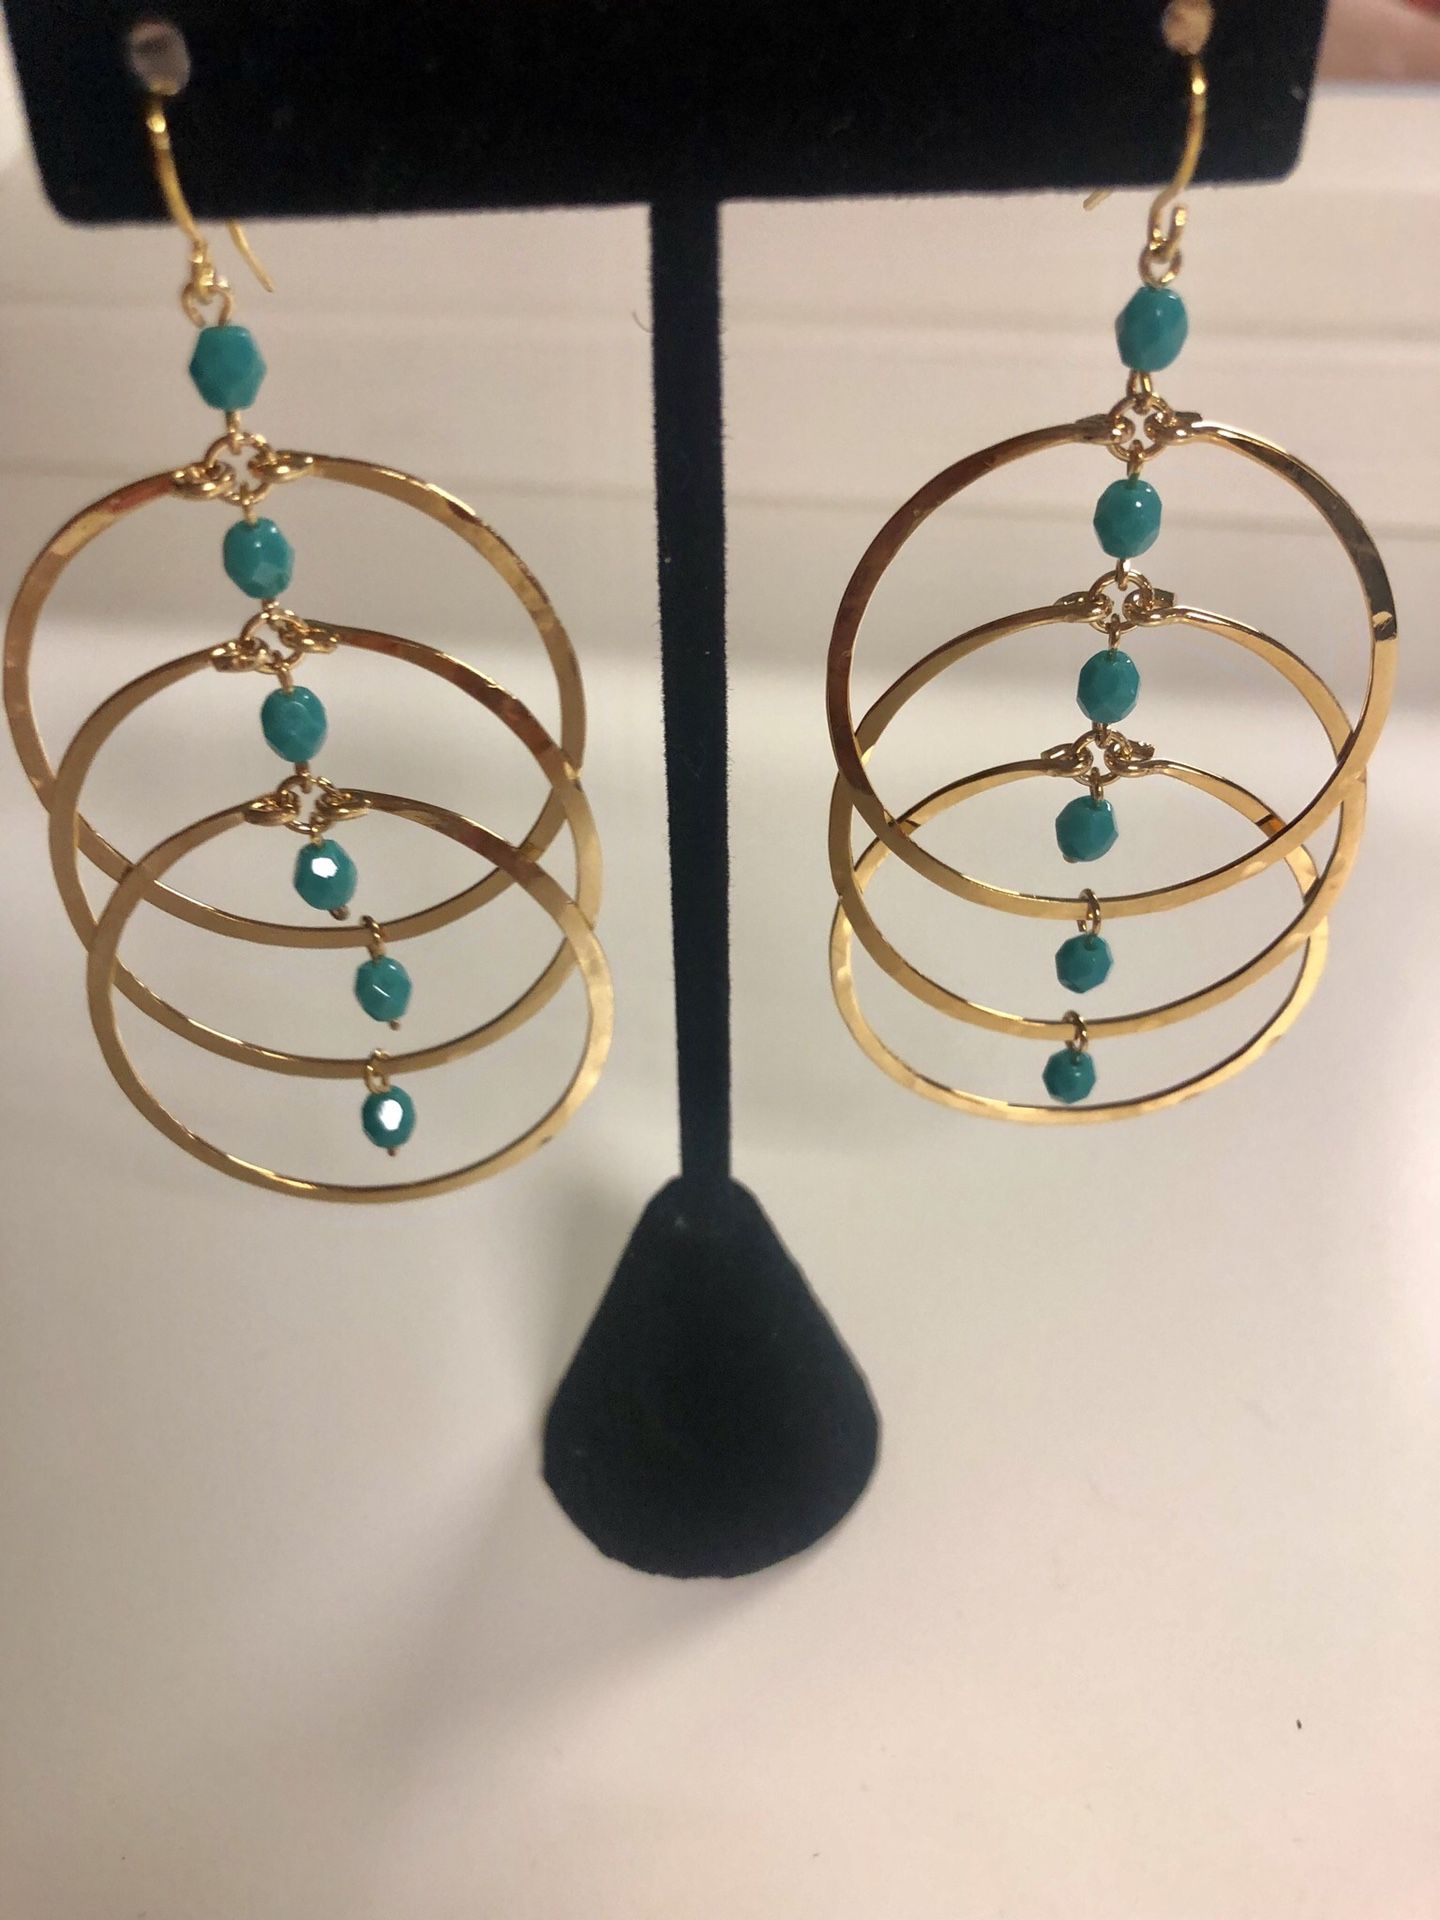 Earrings turquoise surgical steel Earwire exclusive designs. earrings circle turquoise $13.95